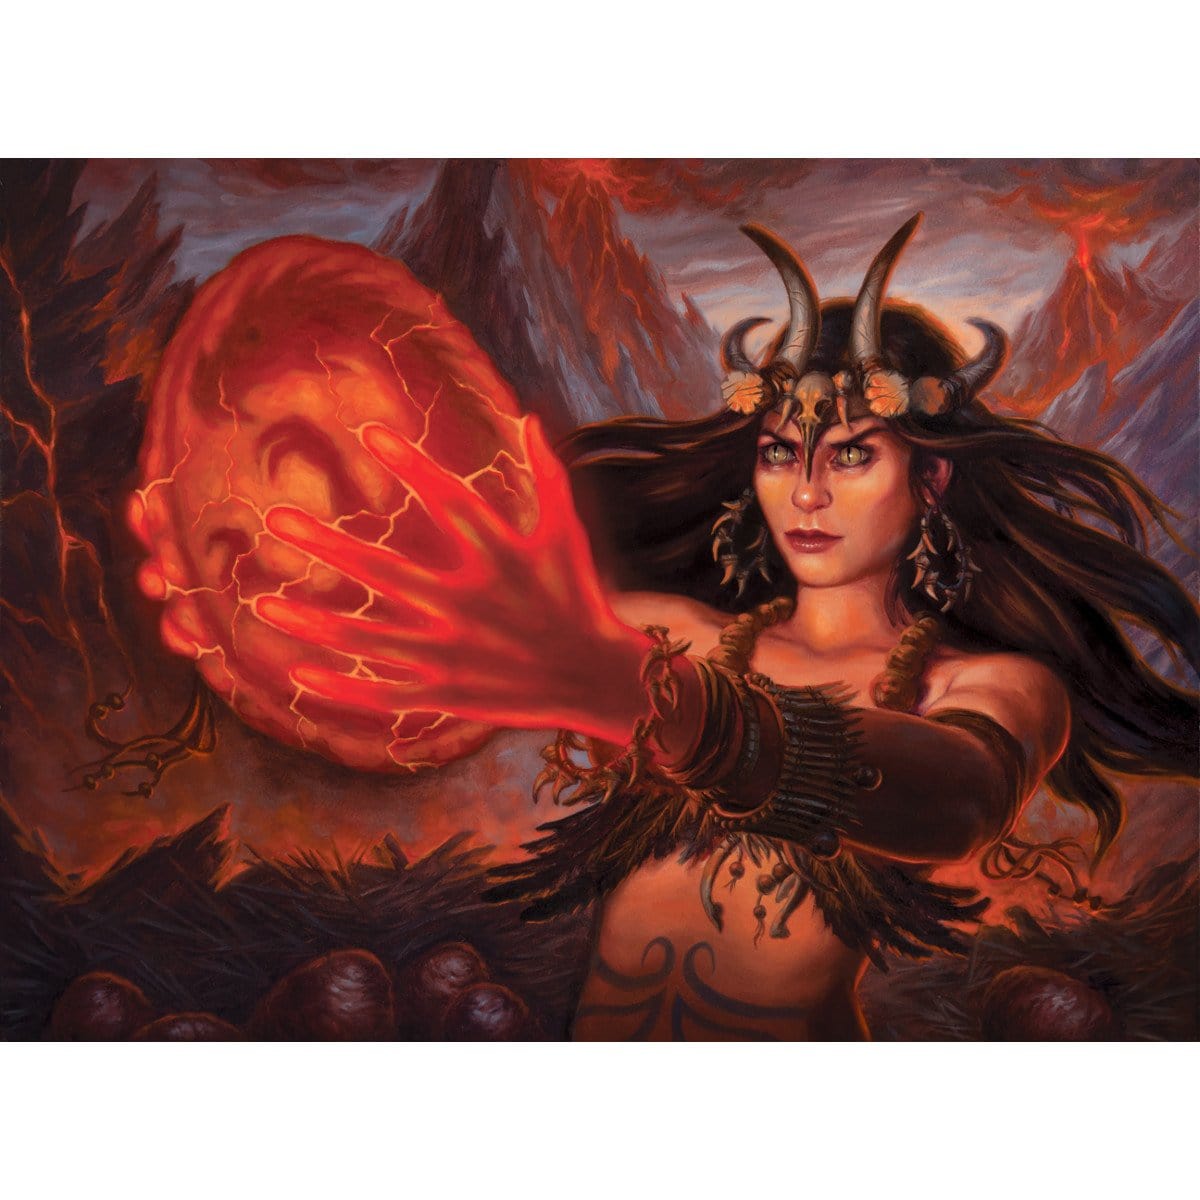 Brood Keeper Print - Print - Original Magic Art - Accessories for Magic the Gathering and other card games